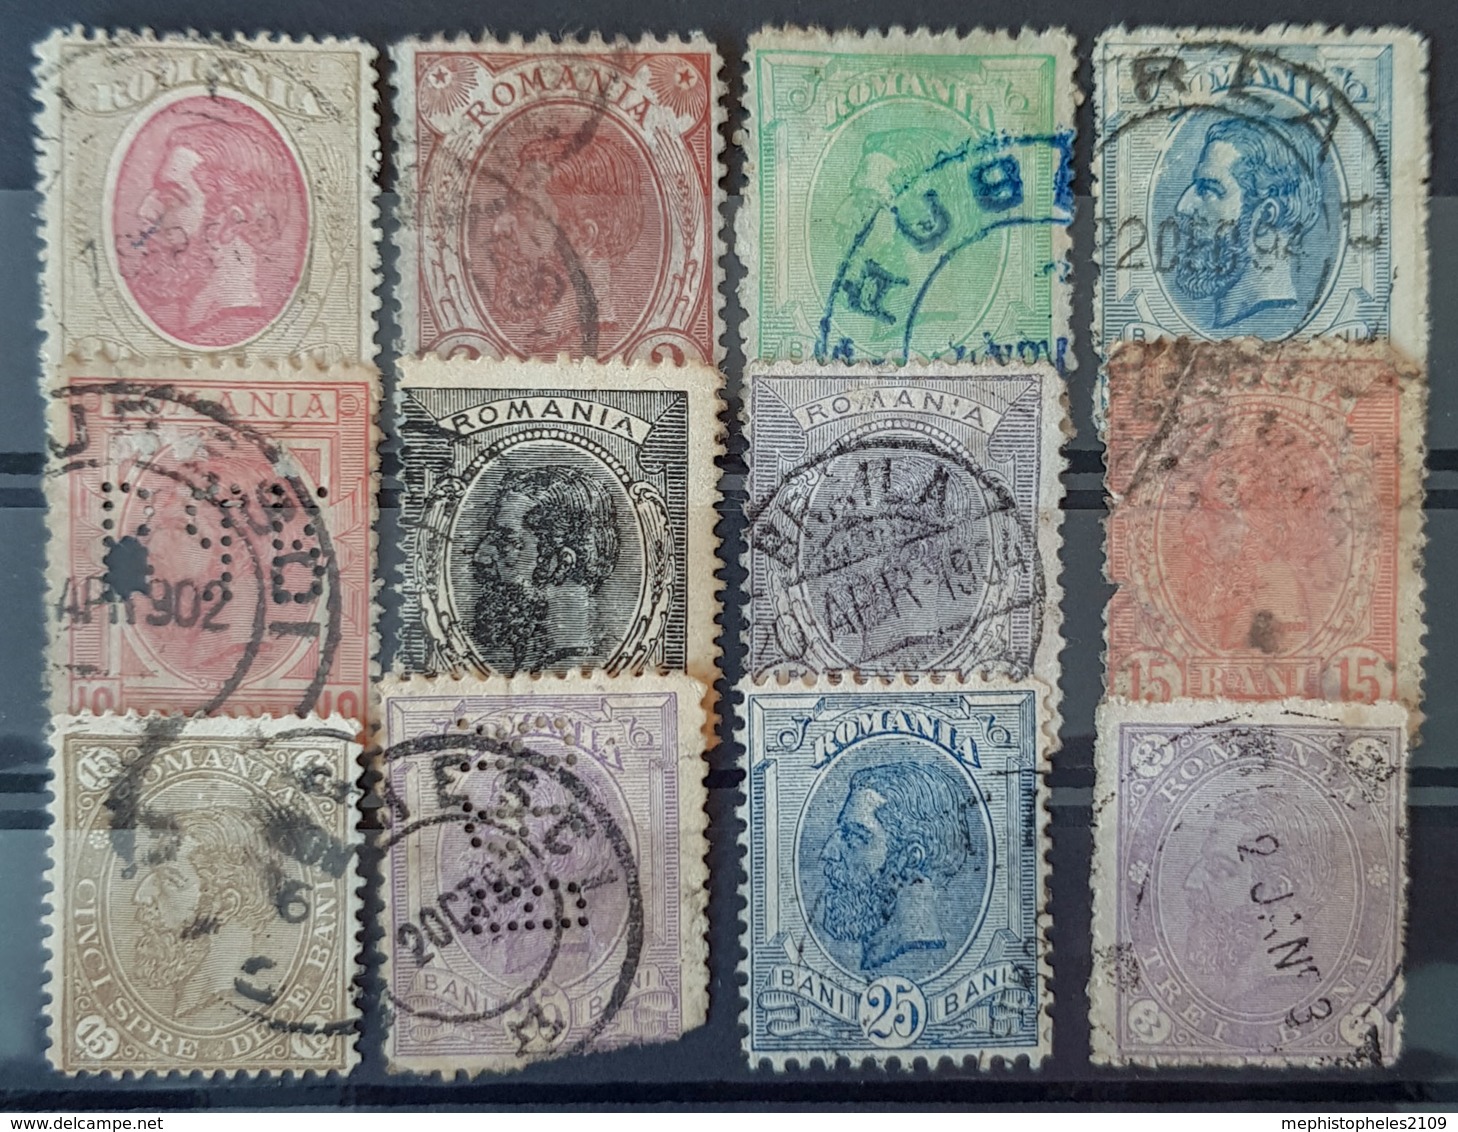 ROMANIA - Canceled - Sc# 95, 98, 117, 119, 120, 121, 123, 124, 125, 126, 140, 141 - Used Stamps